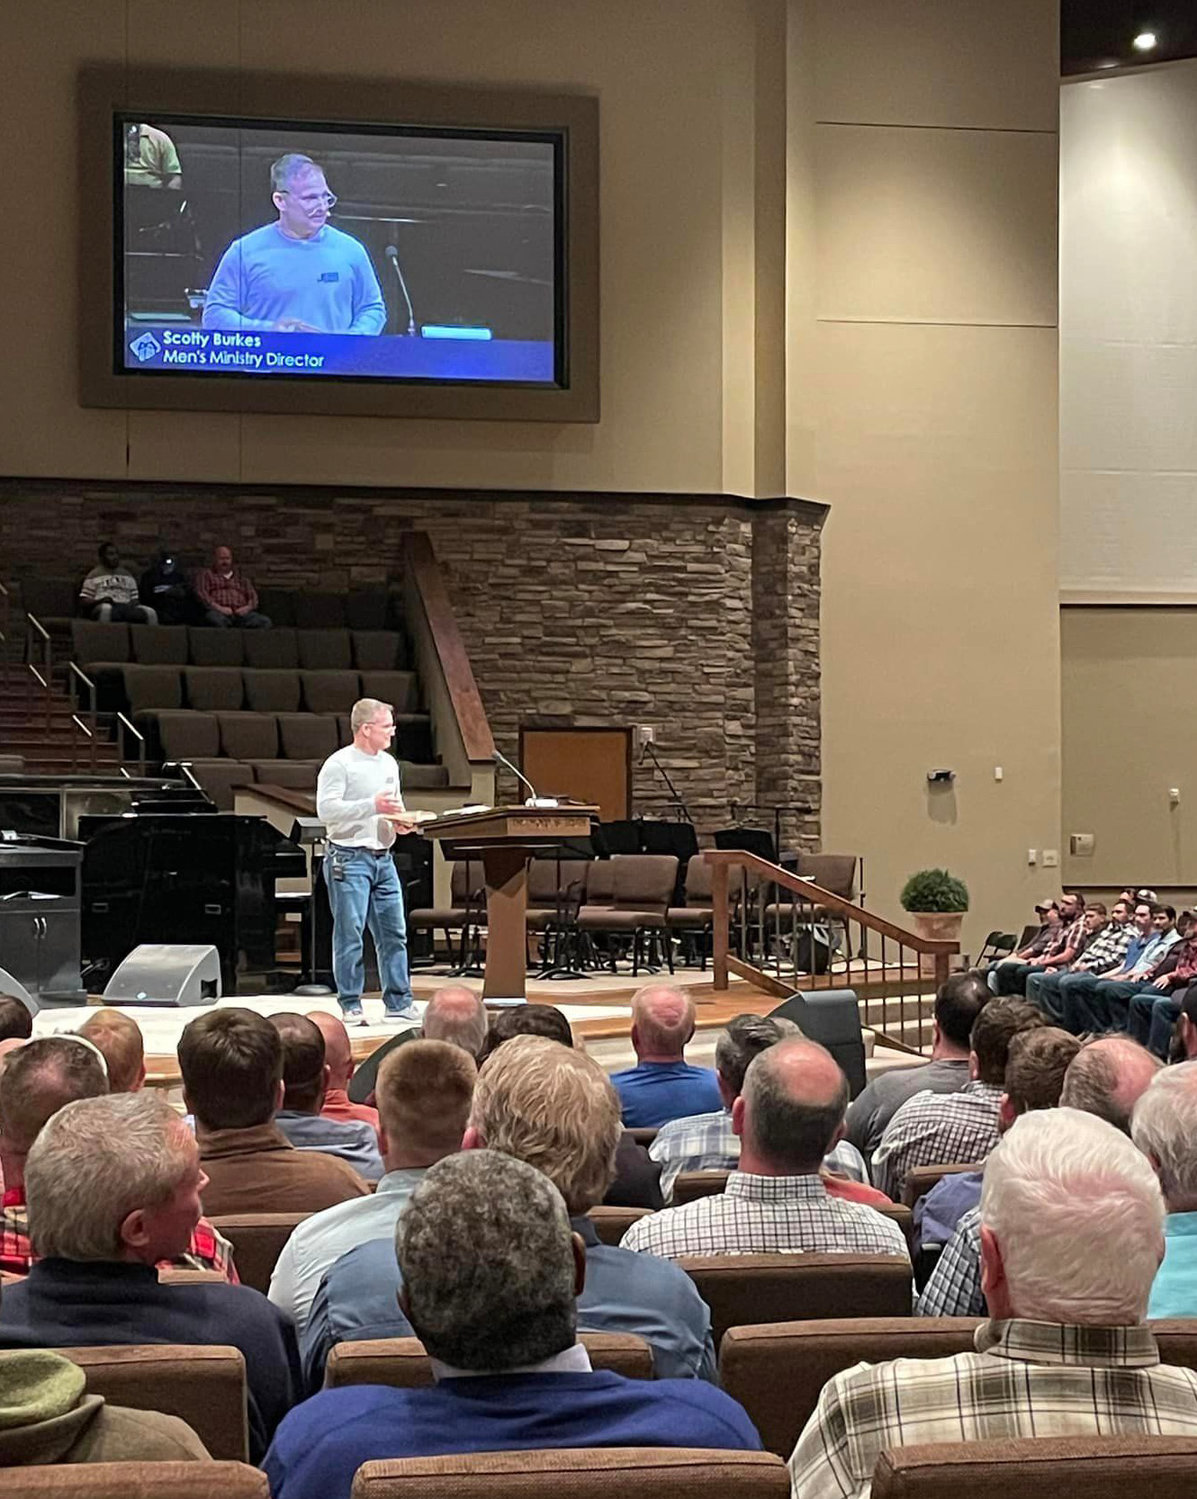 Scotty Burkes challenges men to be Great Commandment and Great Commission men.